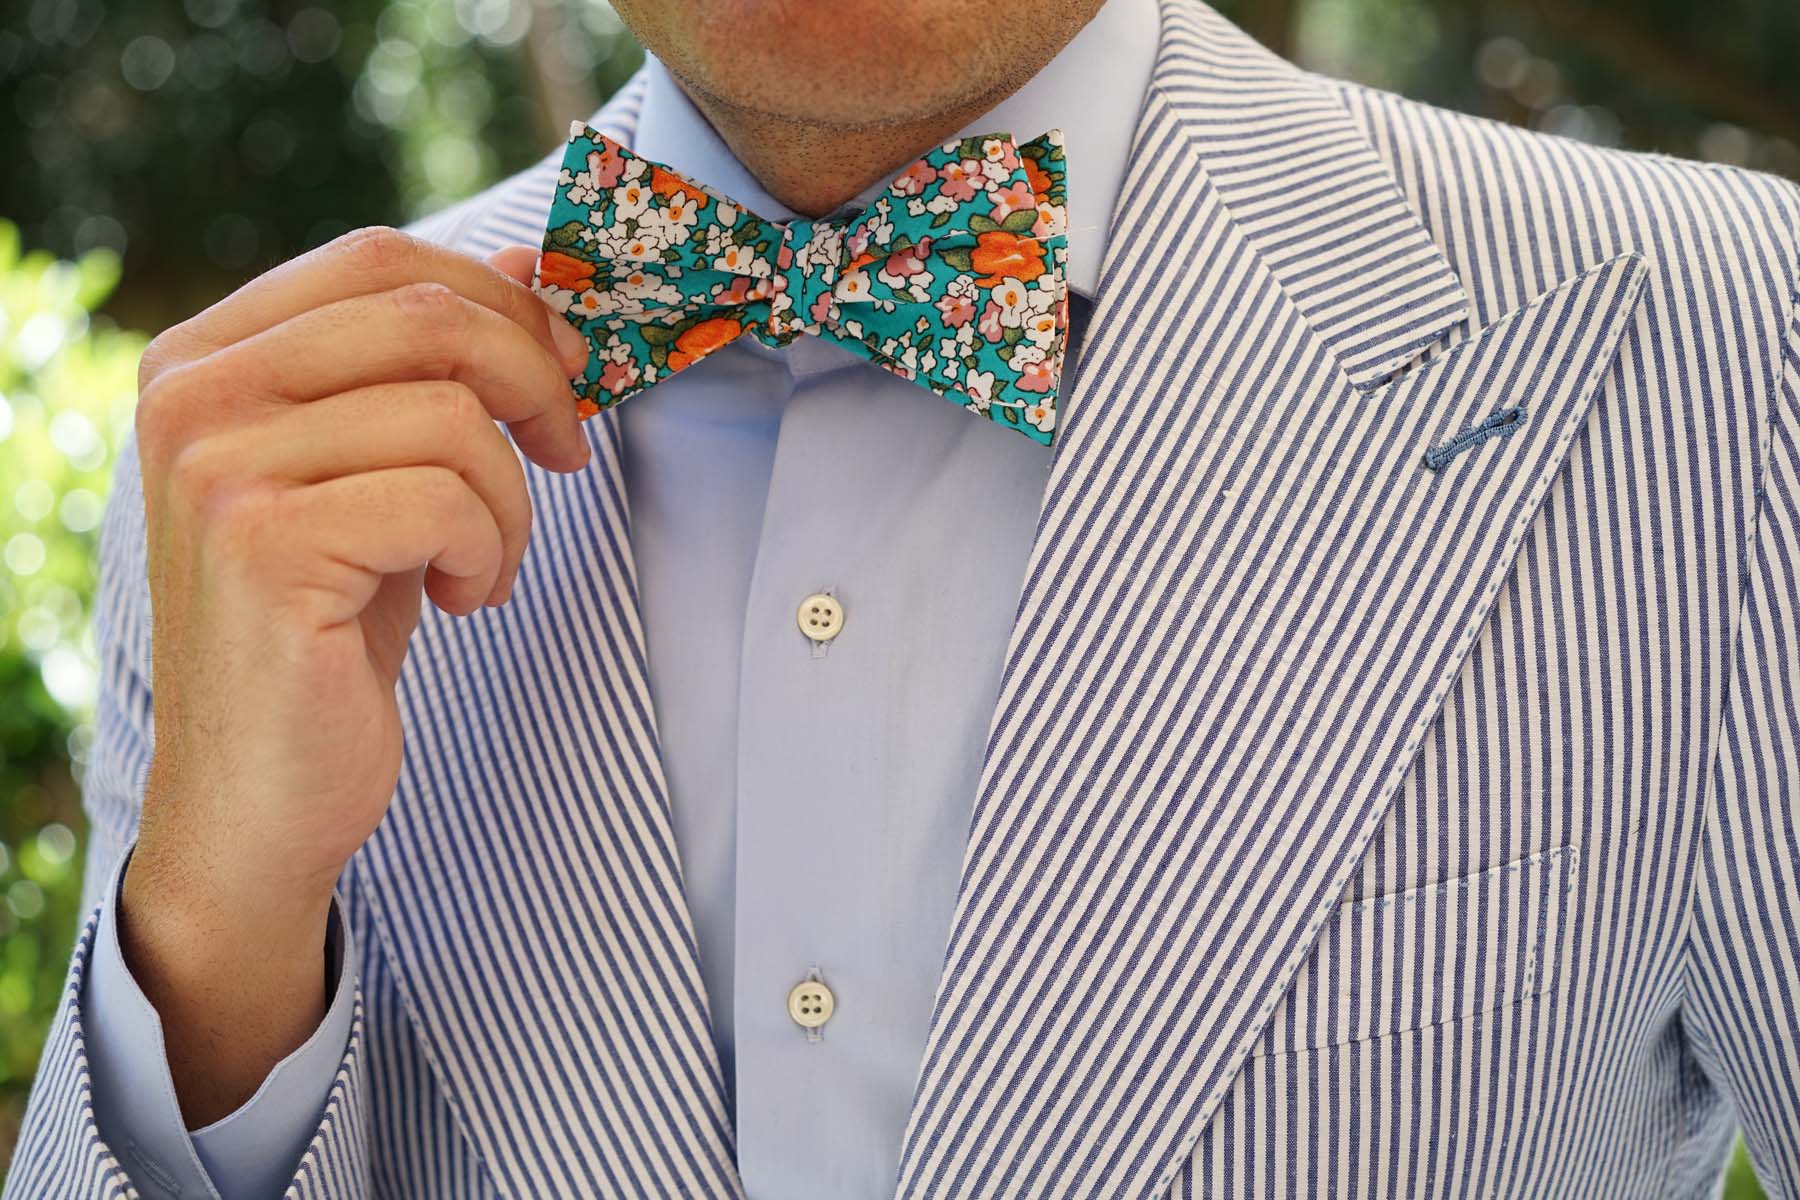 British Virgin Island Floral Self Bow Tie | Turquoise Self-Tied Bowtie ...